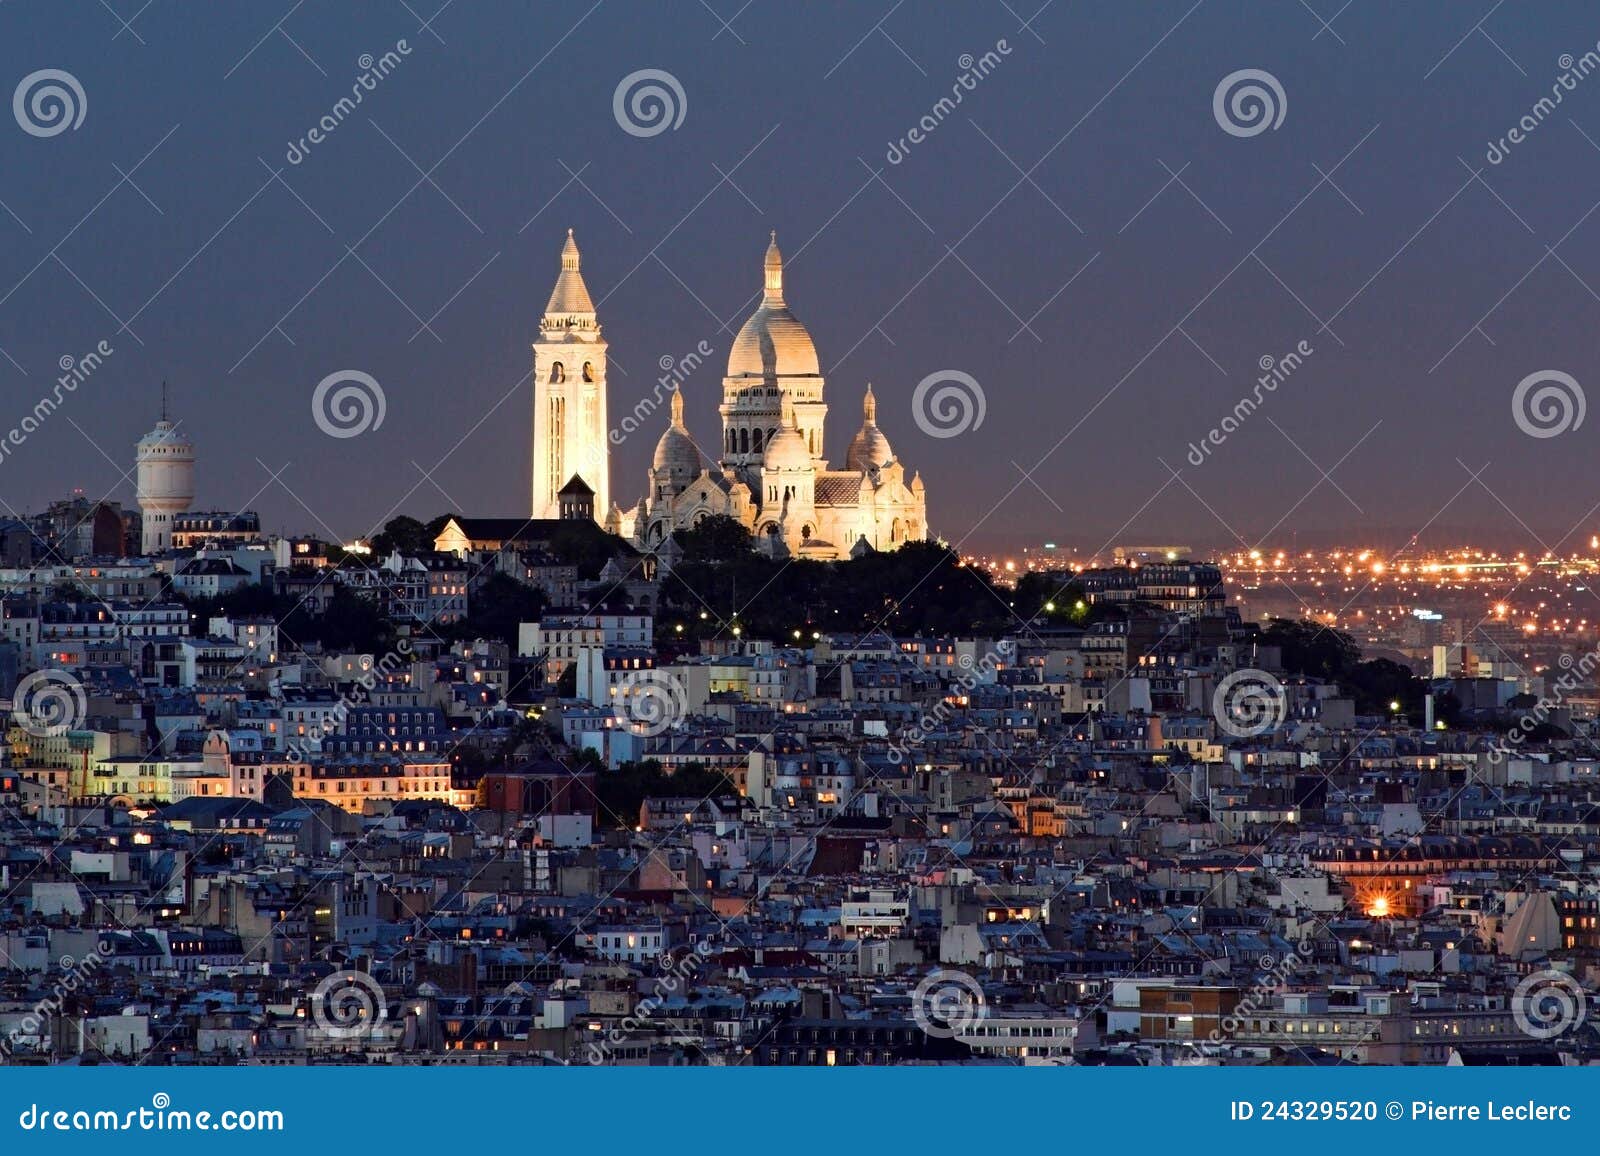 sacre coeur at the submit of montmartre, paris